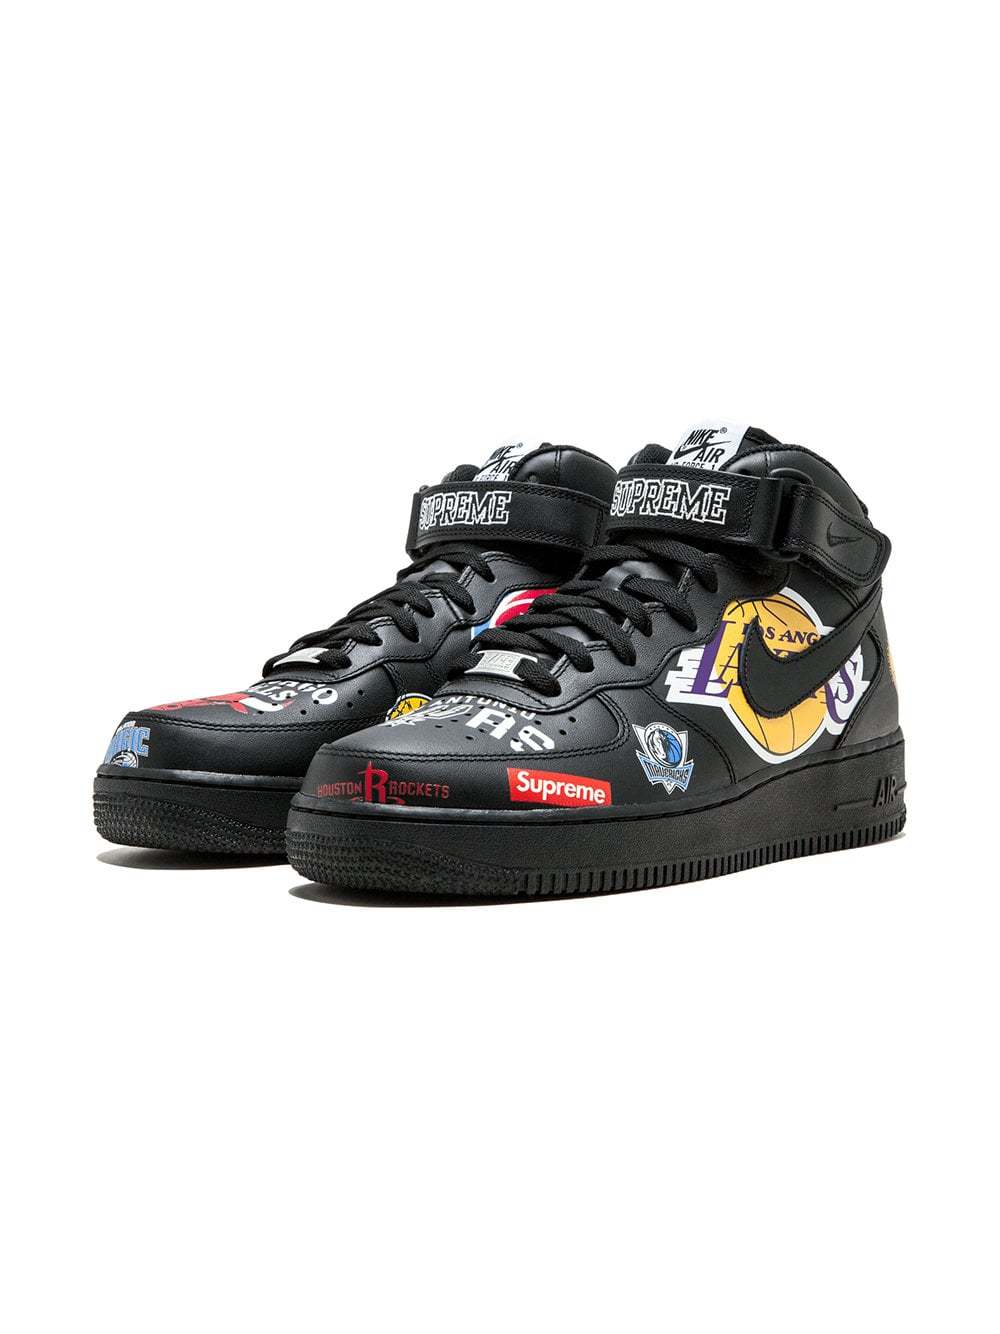 Supreme Air Force 1 Mid 07 Nike X Sneakers, $1,040 | farfetch.com 